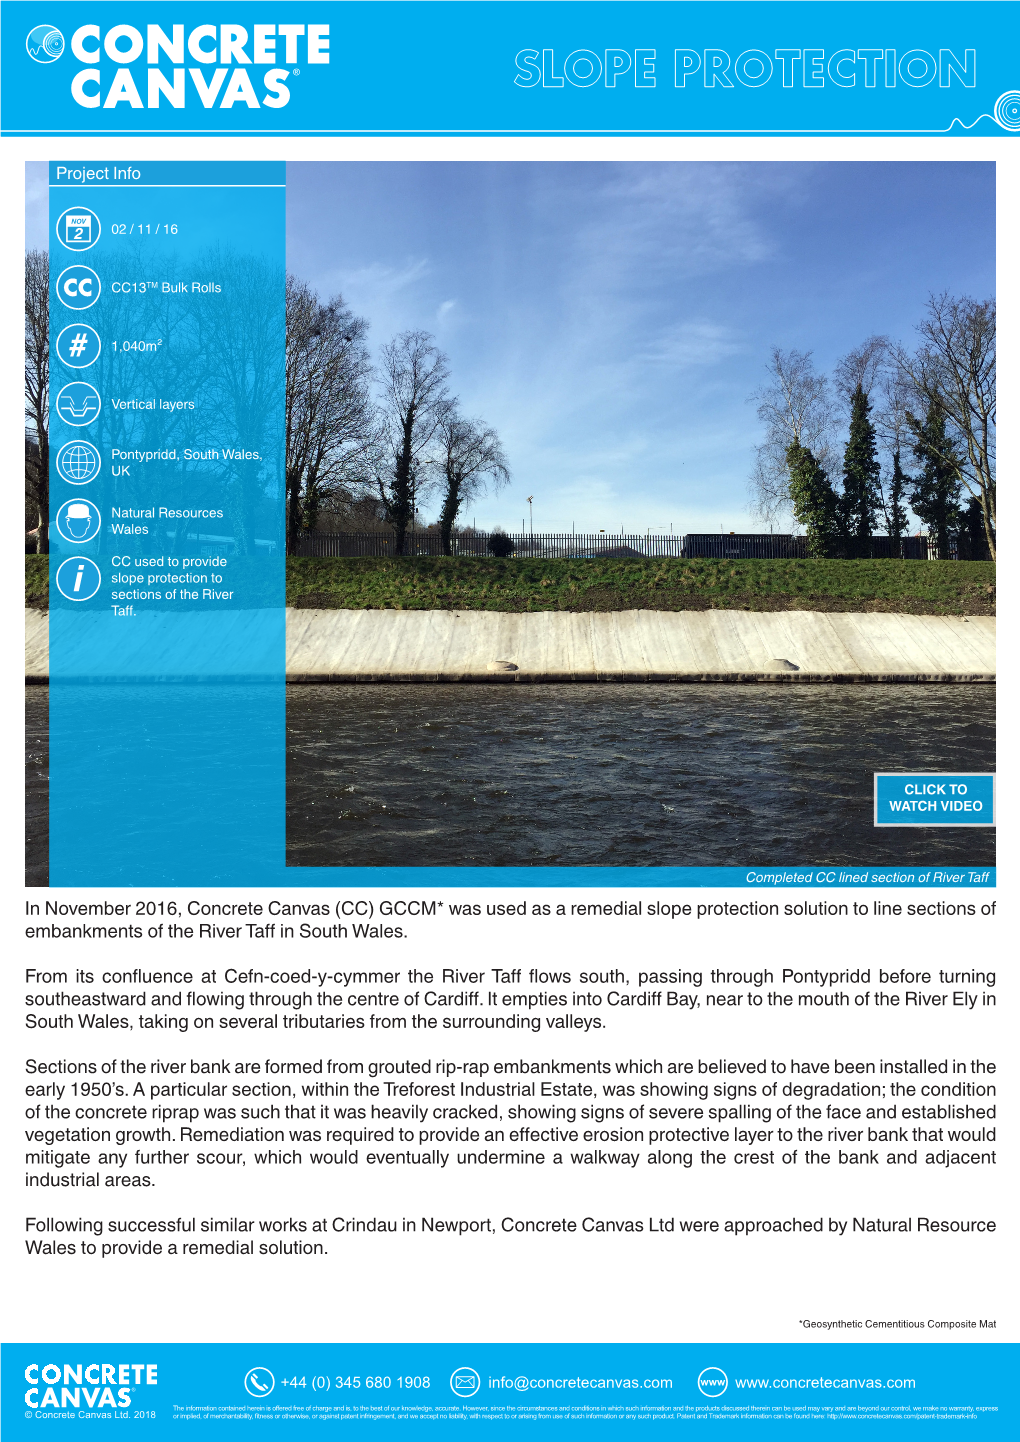 In November 2016, Concrete Canvas (CC) GCCM* Was Used As a Remedial Slope Protection Solution to Line Sections of Embankments of the River Taff in South Wales